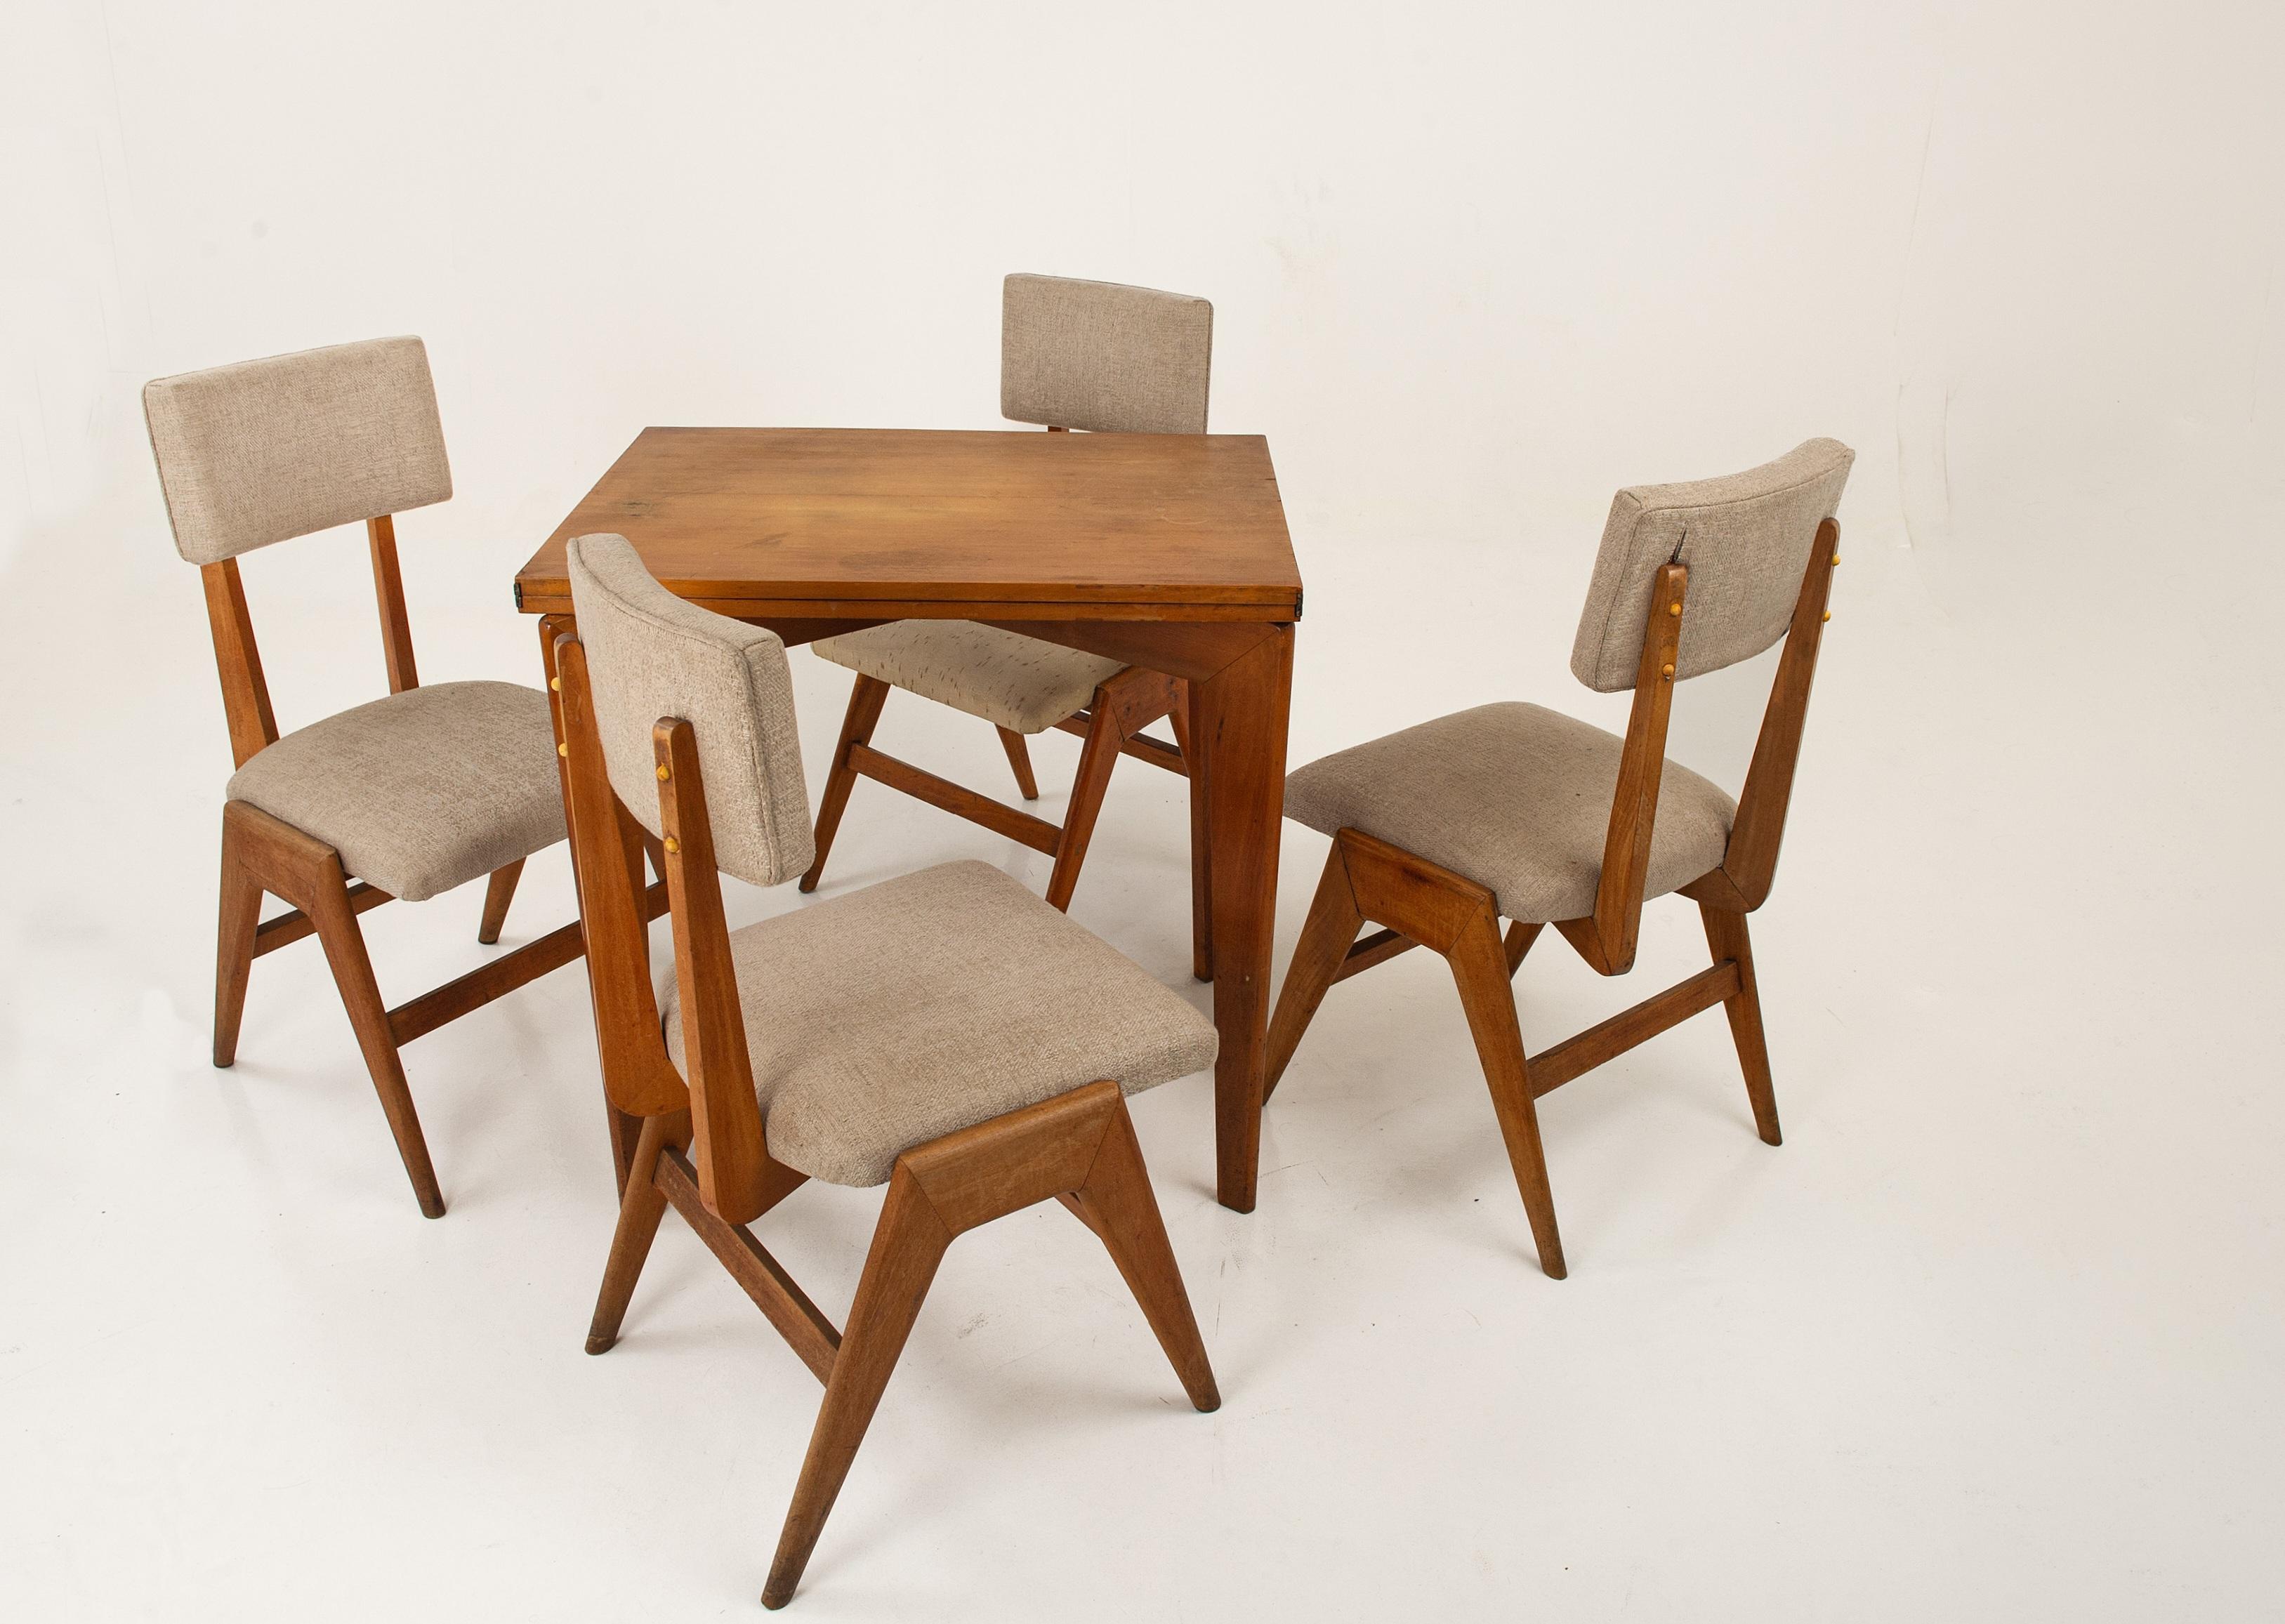 Woodwork Chairs C10 by Lina Bo Bardi